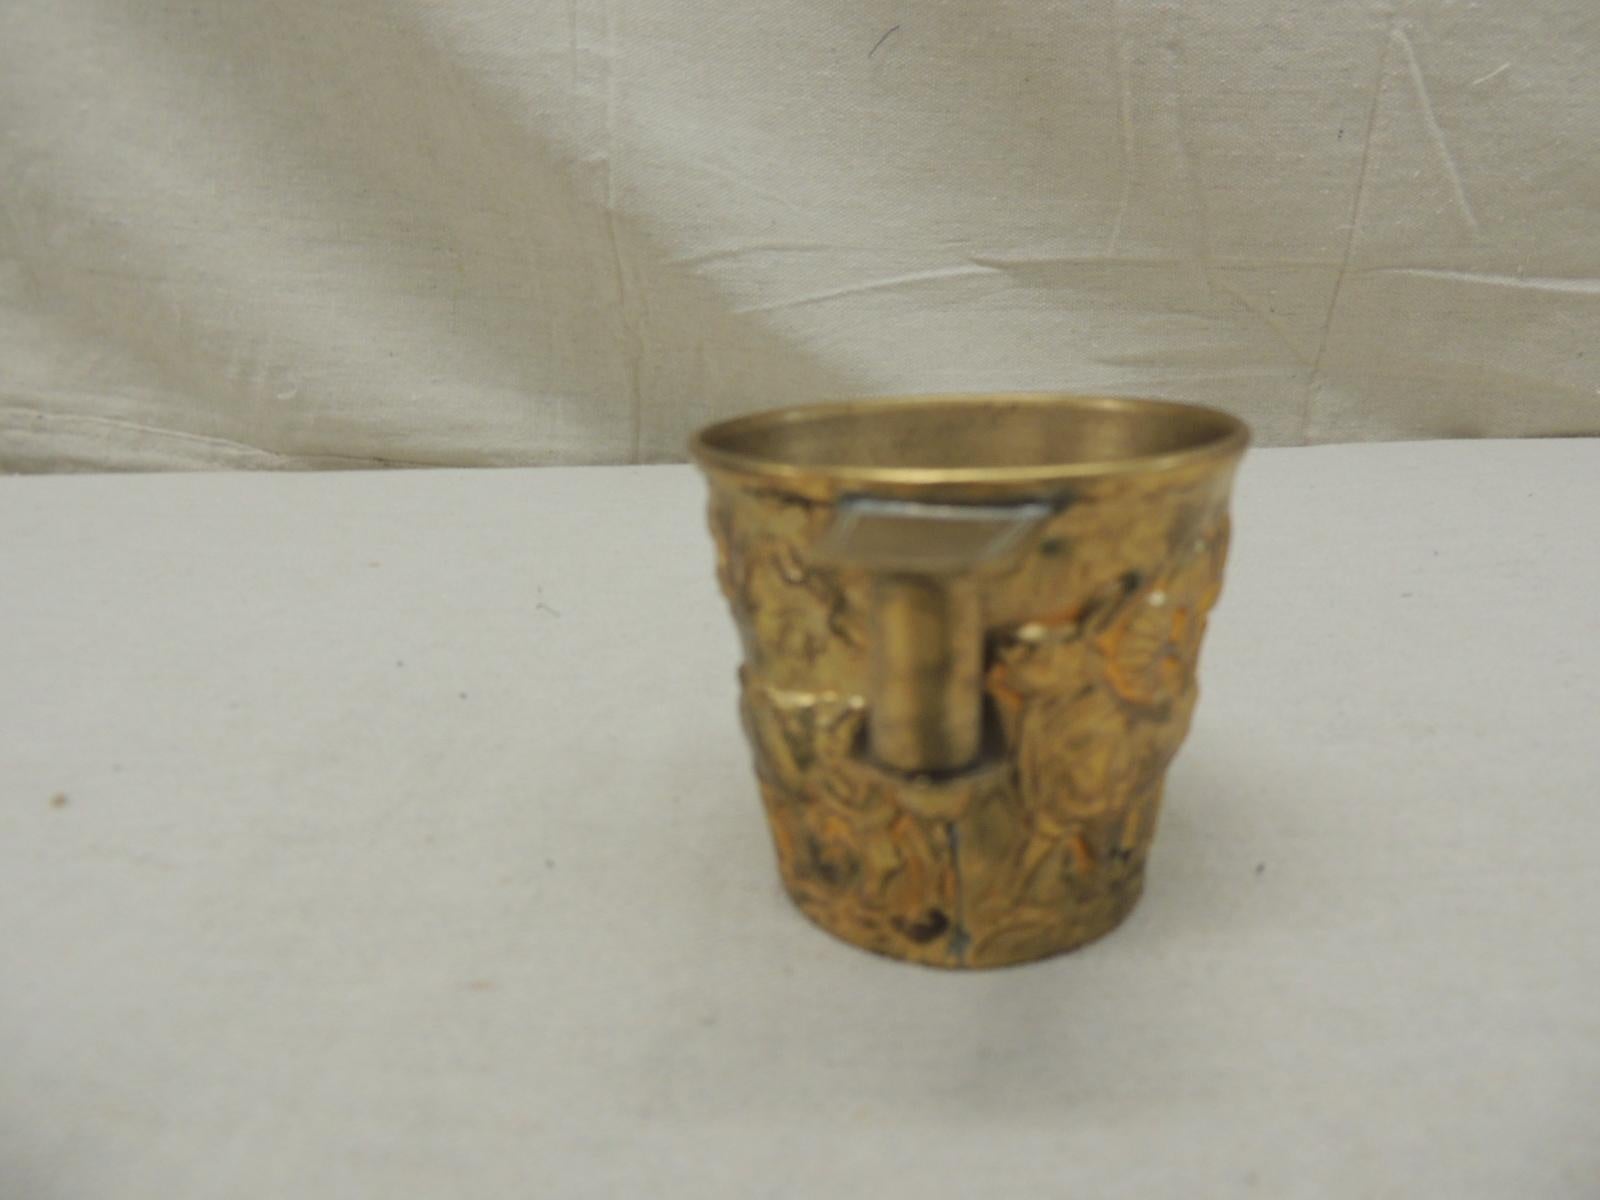 Vintage brass Repoussé wine tasting cup
Stamped made in Greece/Margo
Depicting cattles
Size: 4